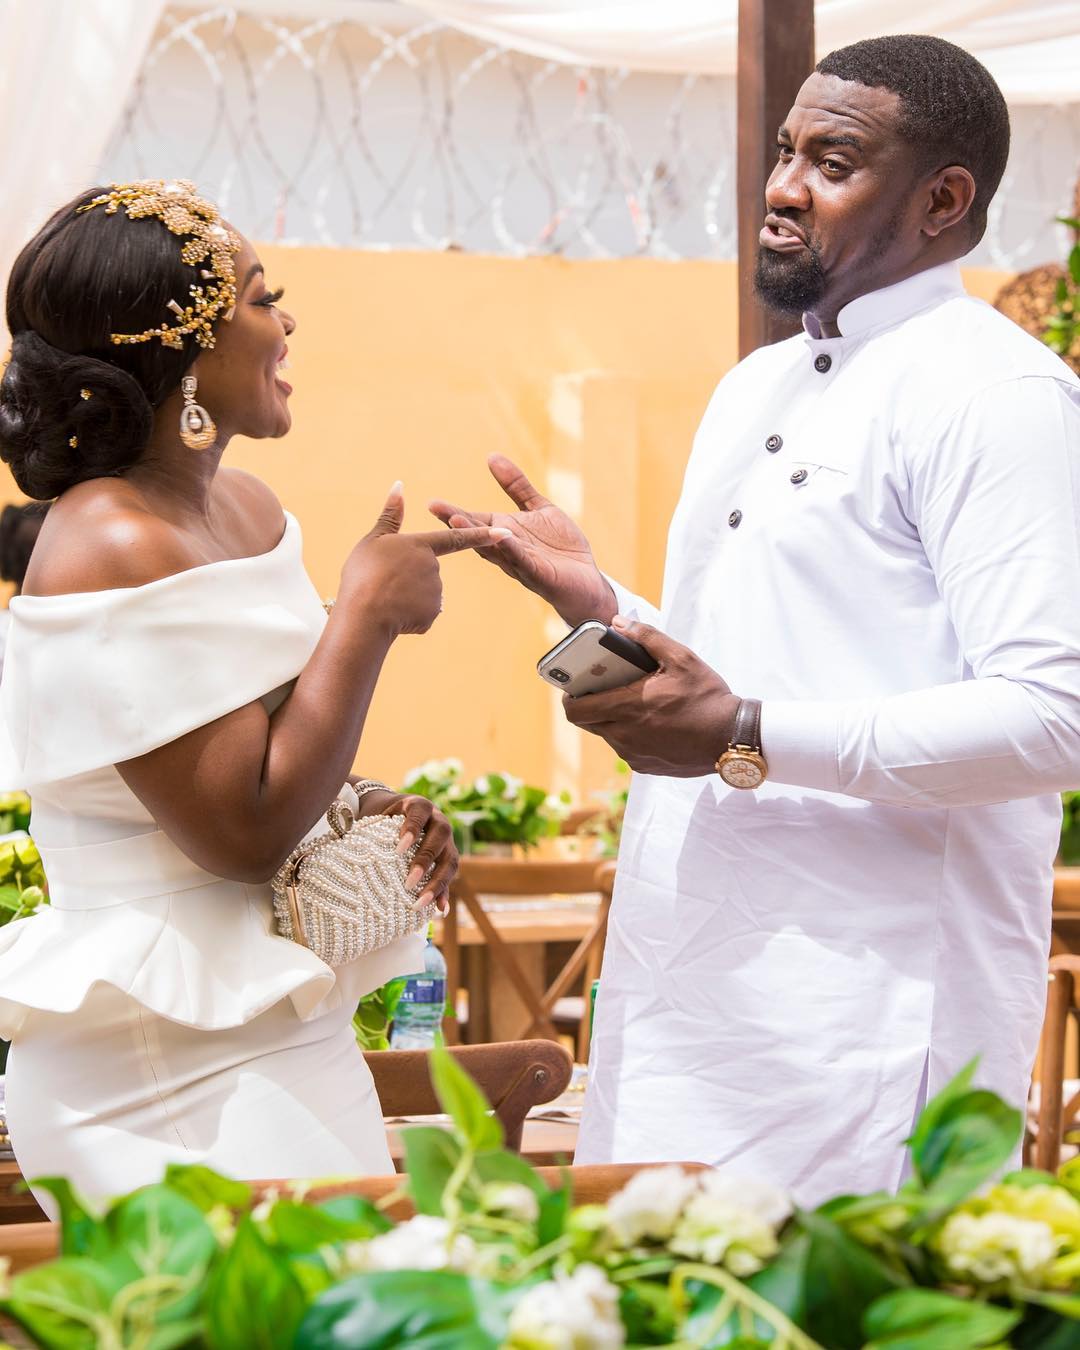 Frederick Nuamah And Martekor Private Engagement Ceremony (1)